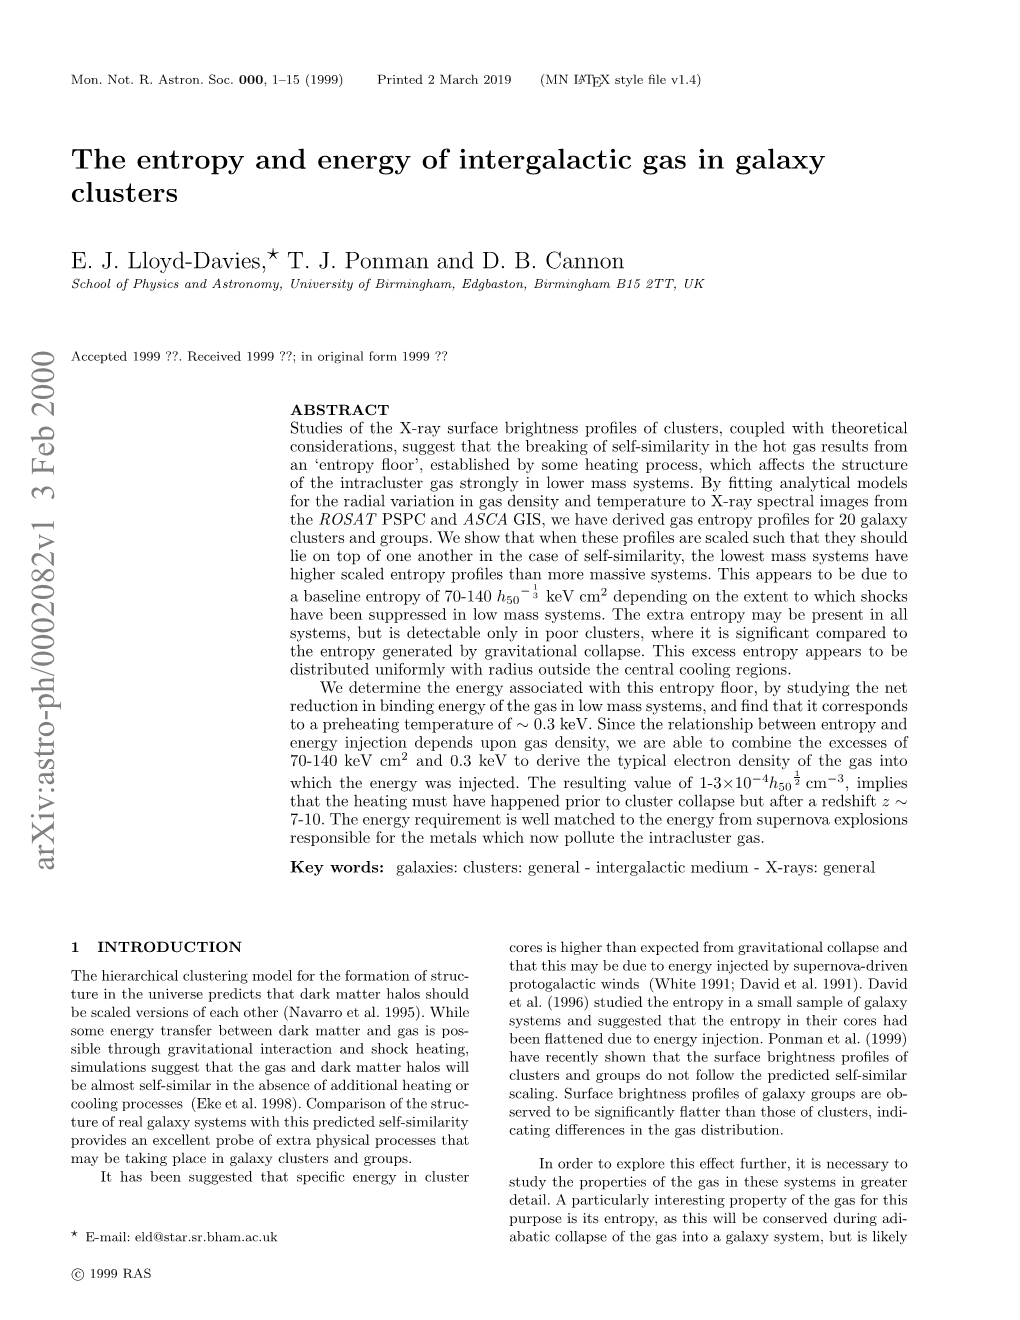 The Entropy and Energy of Intergalactic Gas in Galaxy Clusters 3 Tems Which Is Fairly Relaxed and X-Ray Bright